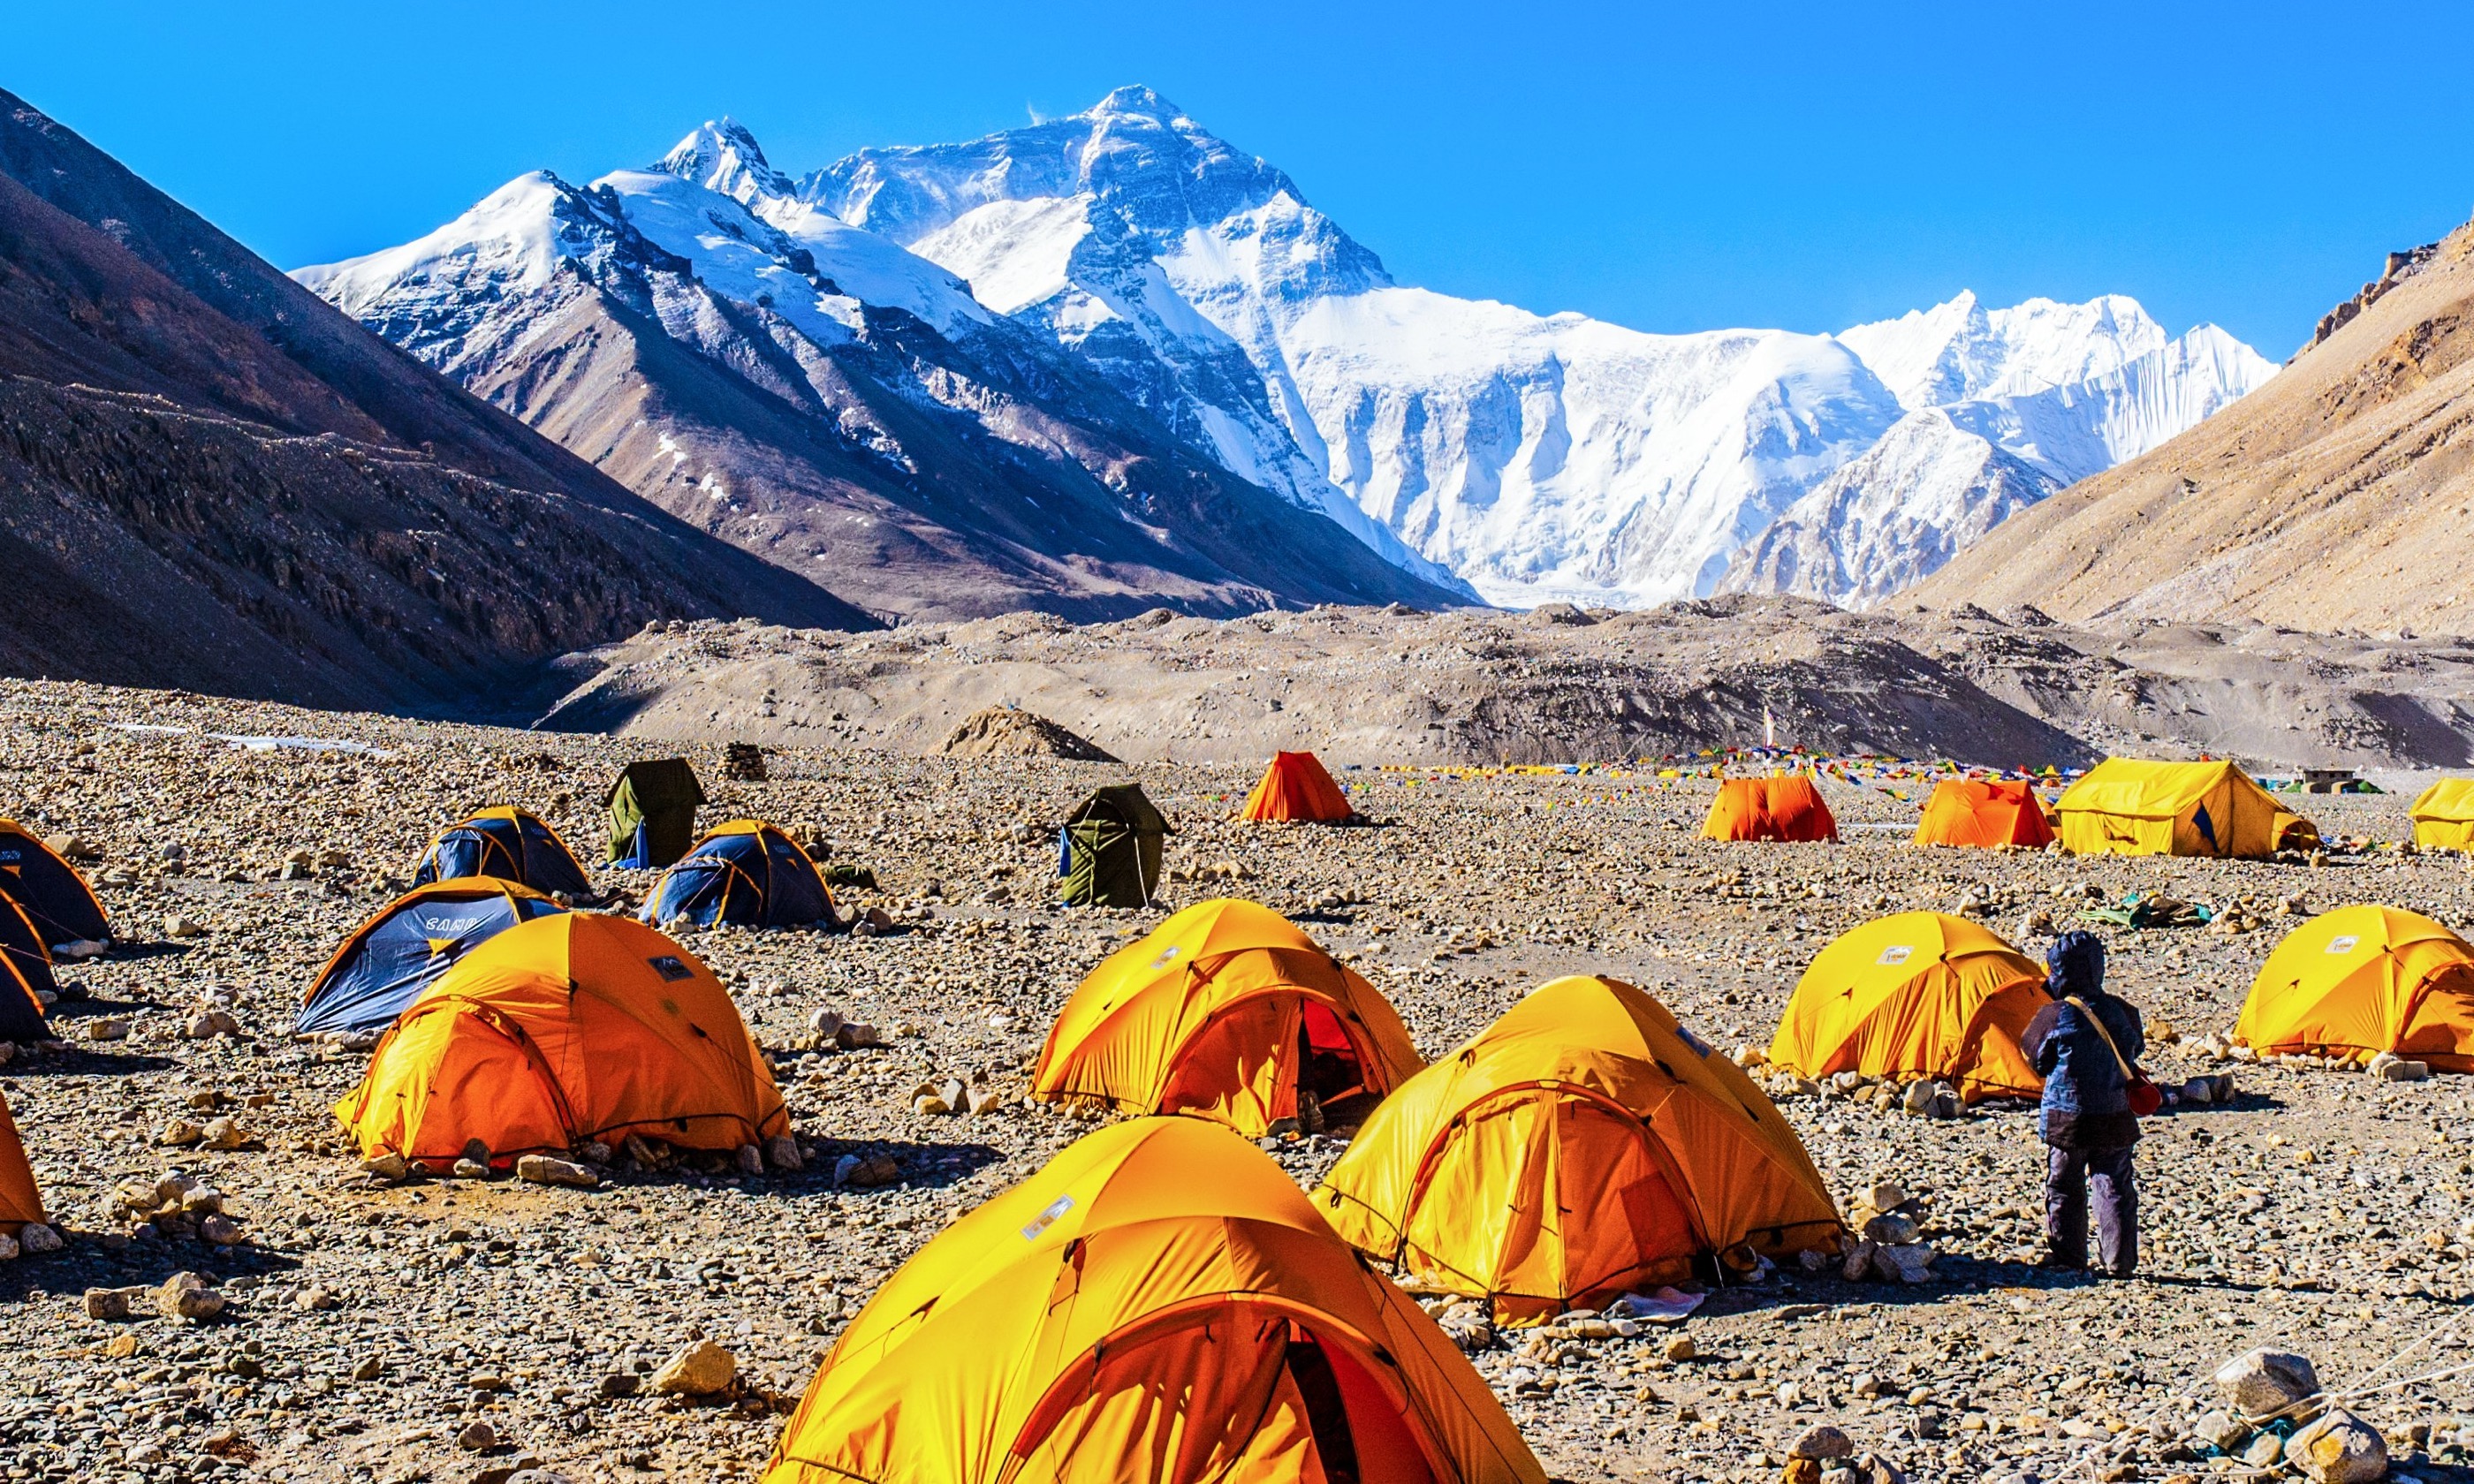 Tents pitched at Base Camp (Shutterstock.com)